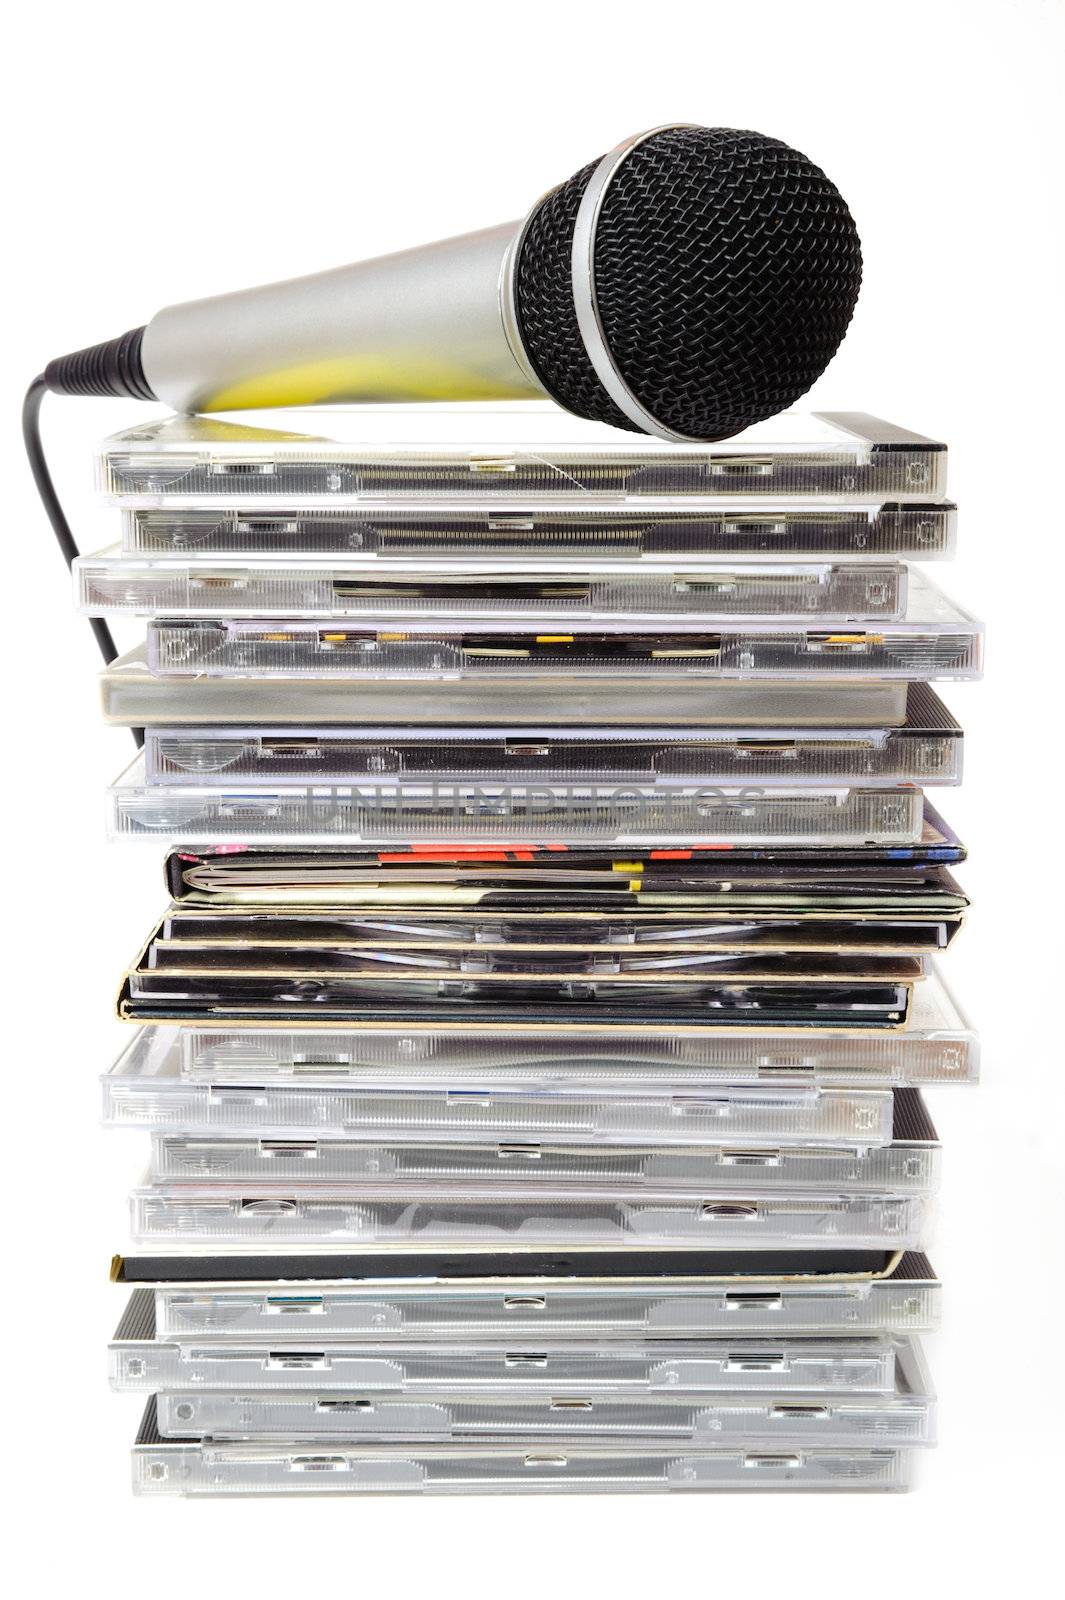 Microphone and karaoke compact disc collection on white background